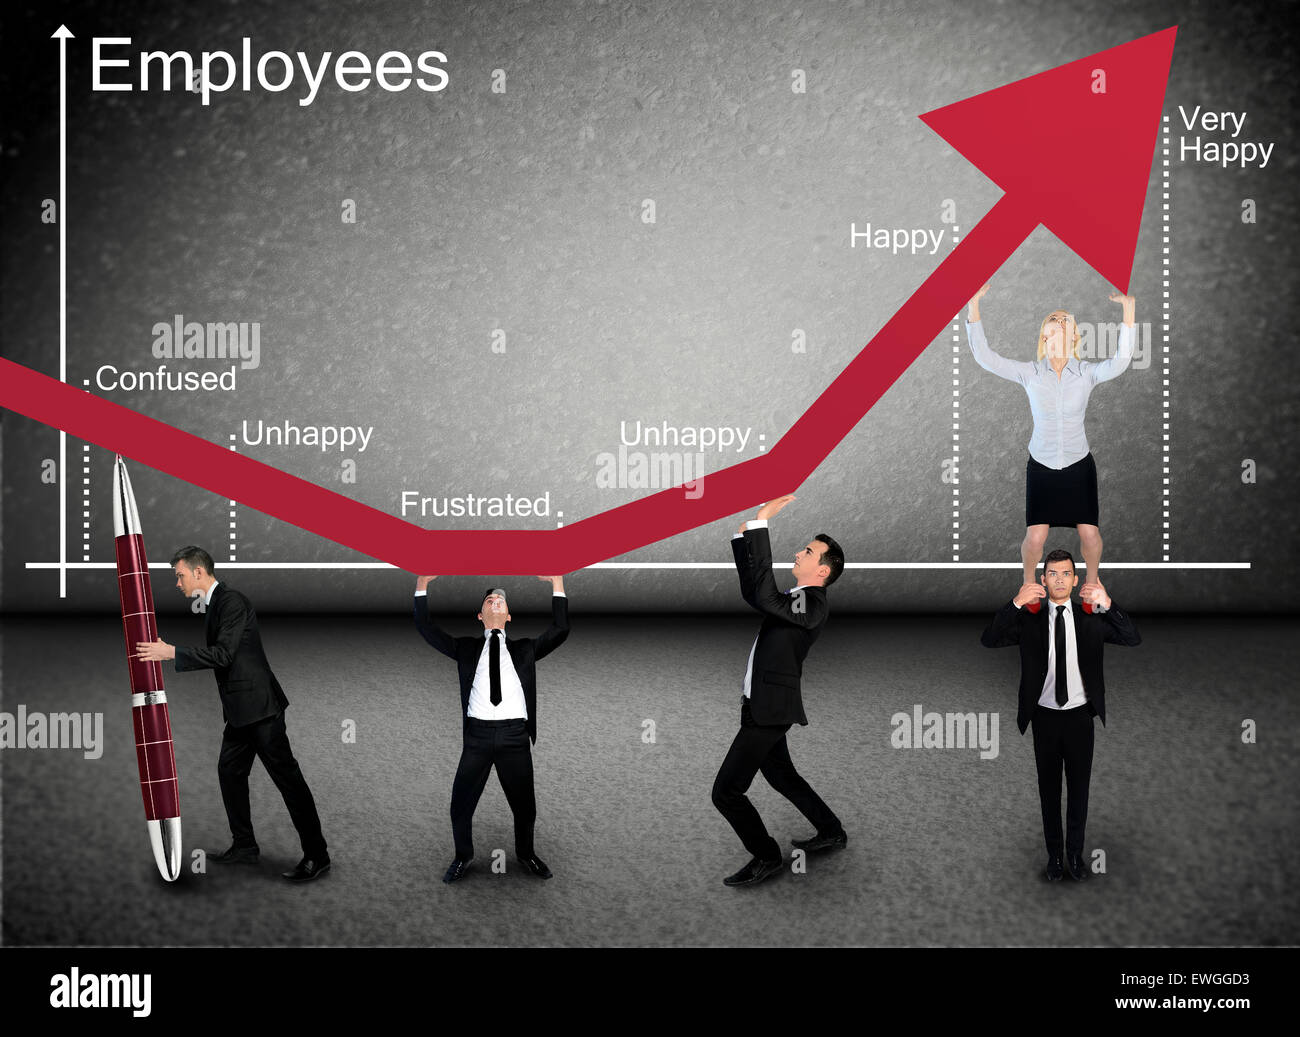 Business team push Employees graphic arrow up Stock Photo